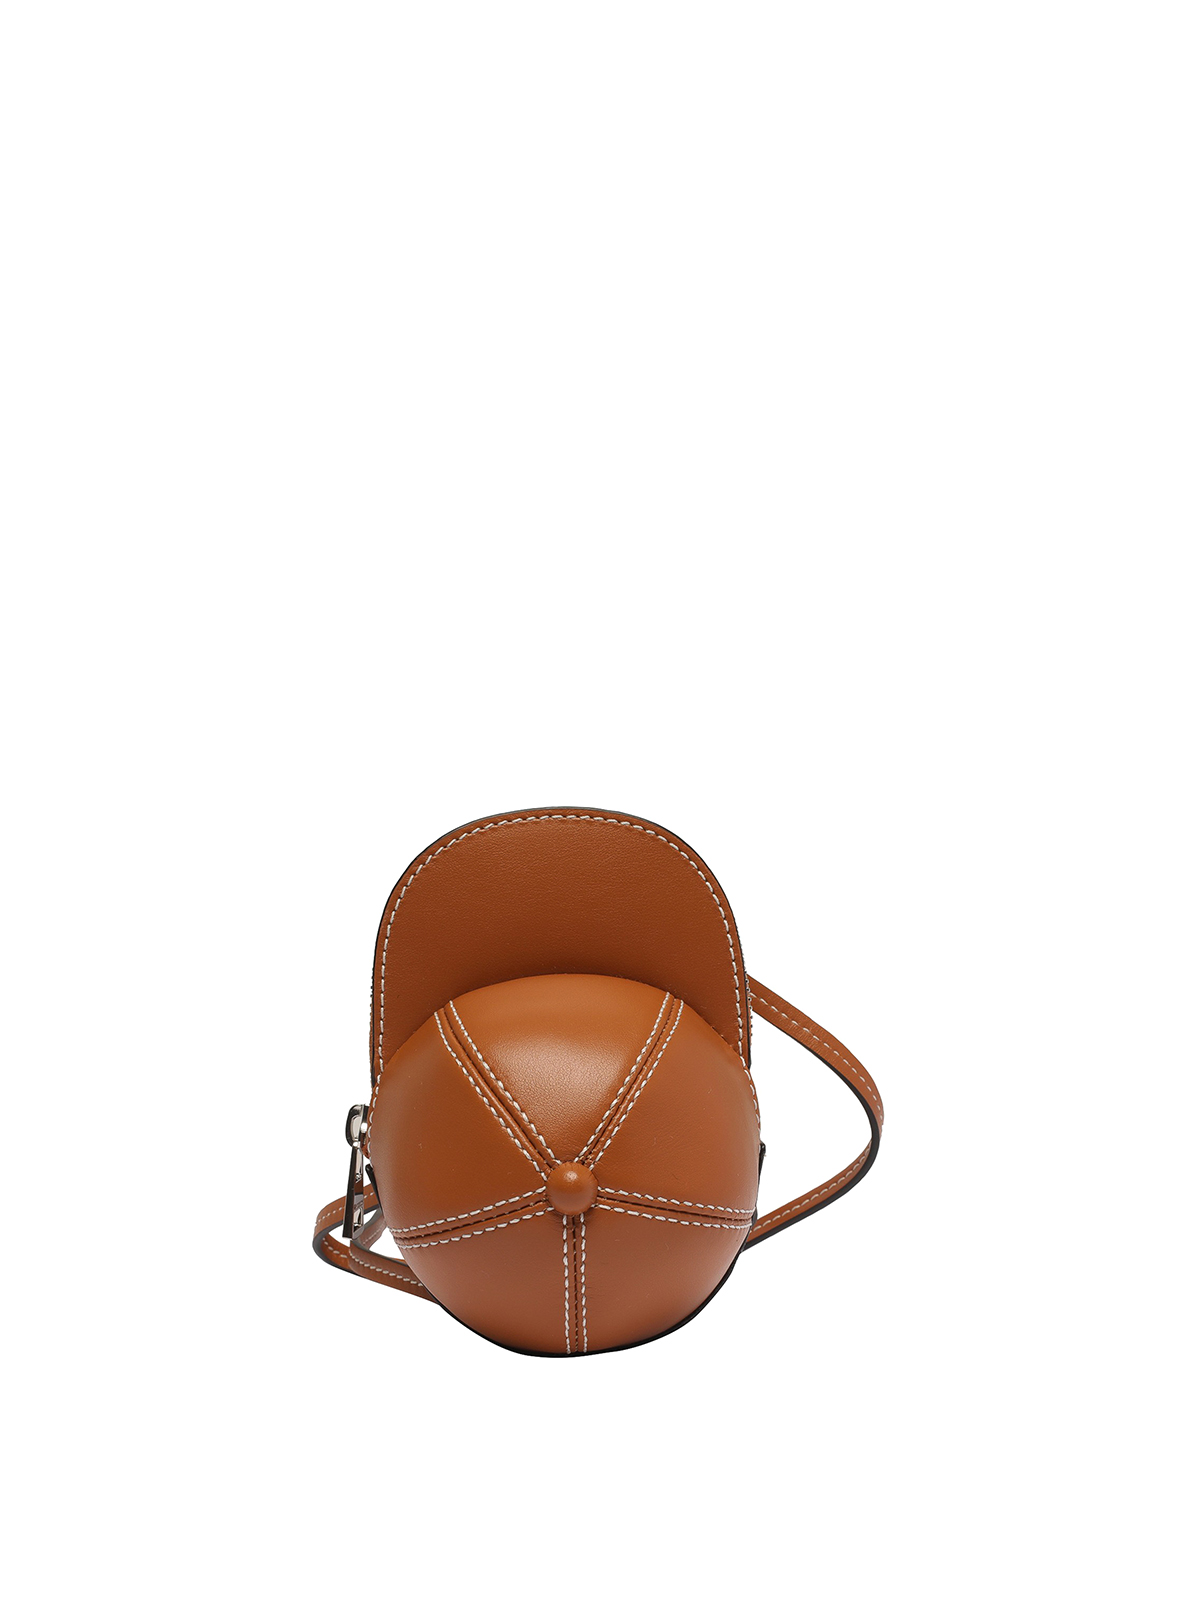 Jw Anderson Leather Shaped Cap Bag With Zip Closure In Brown